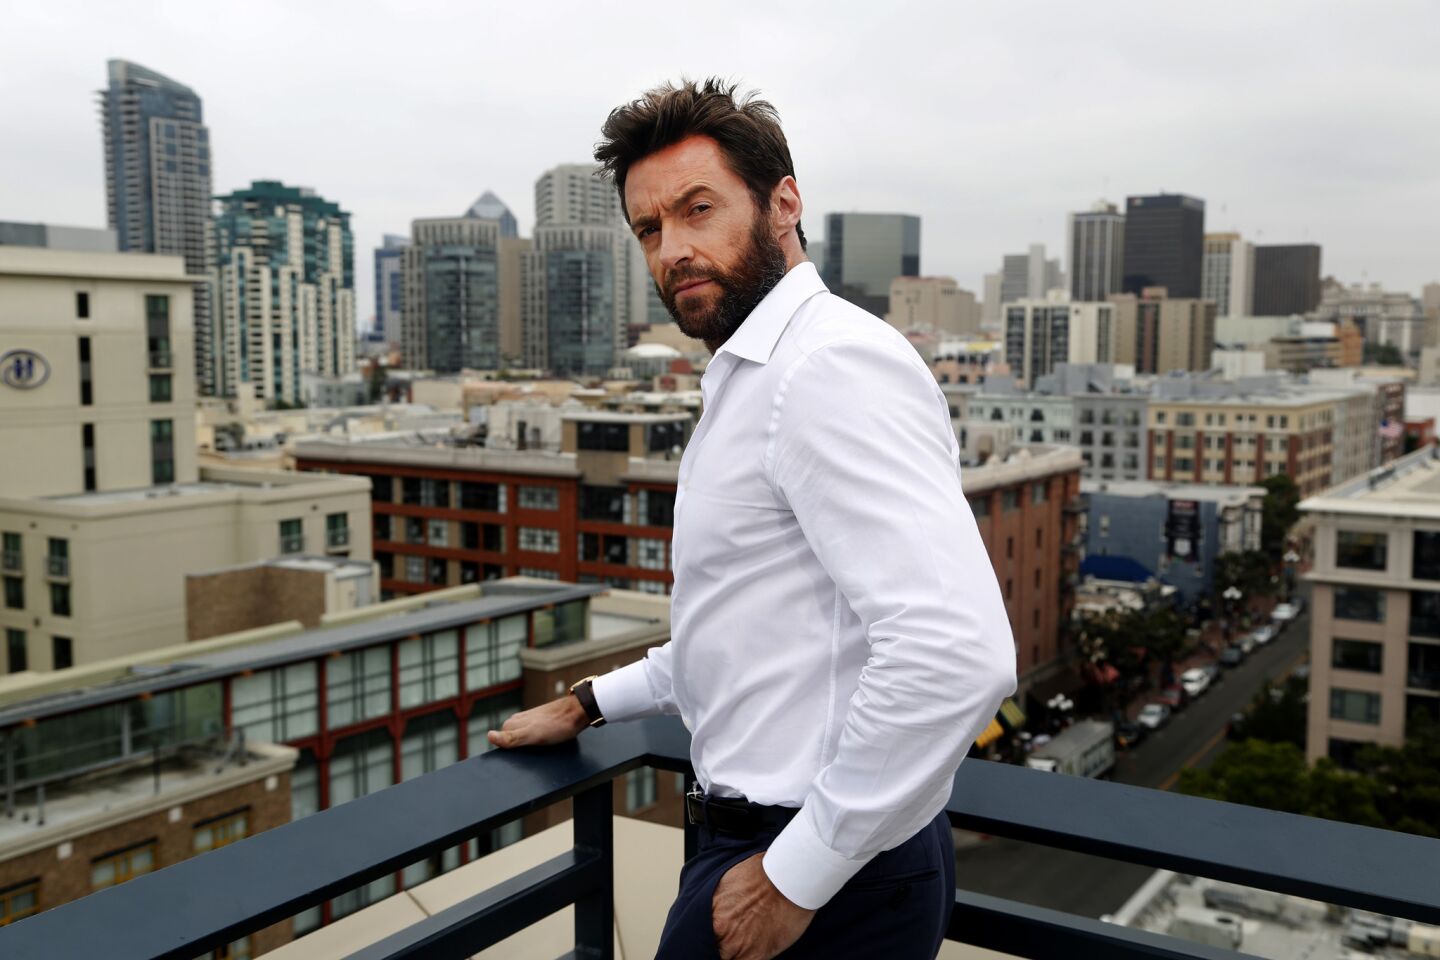 Hugh Jackman says his latest film, "The Wolverine," reveals more of the mutant character's inner pain and thoughts.